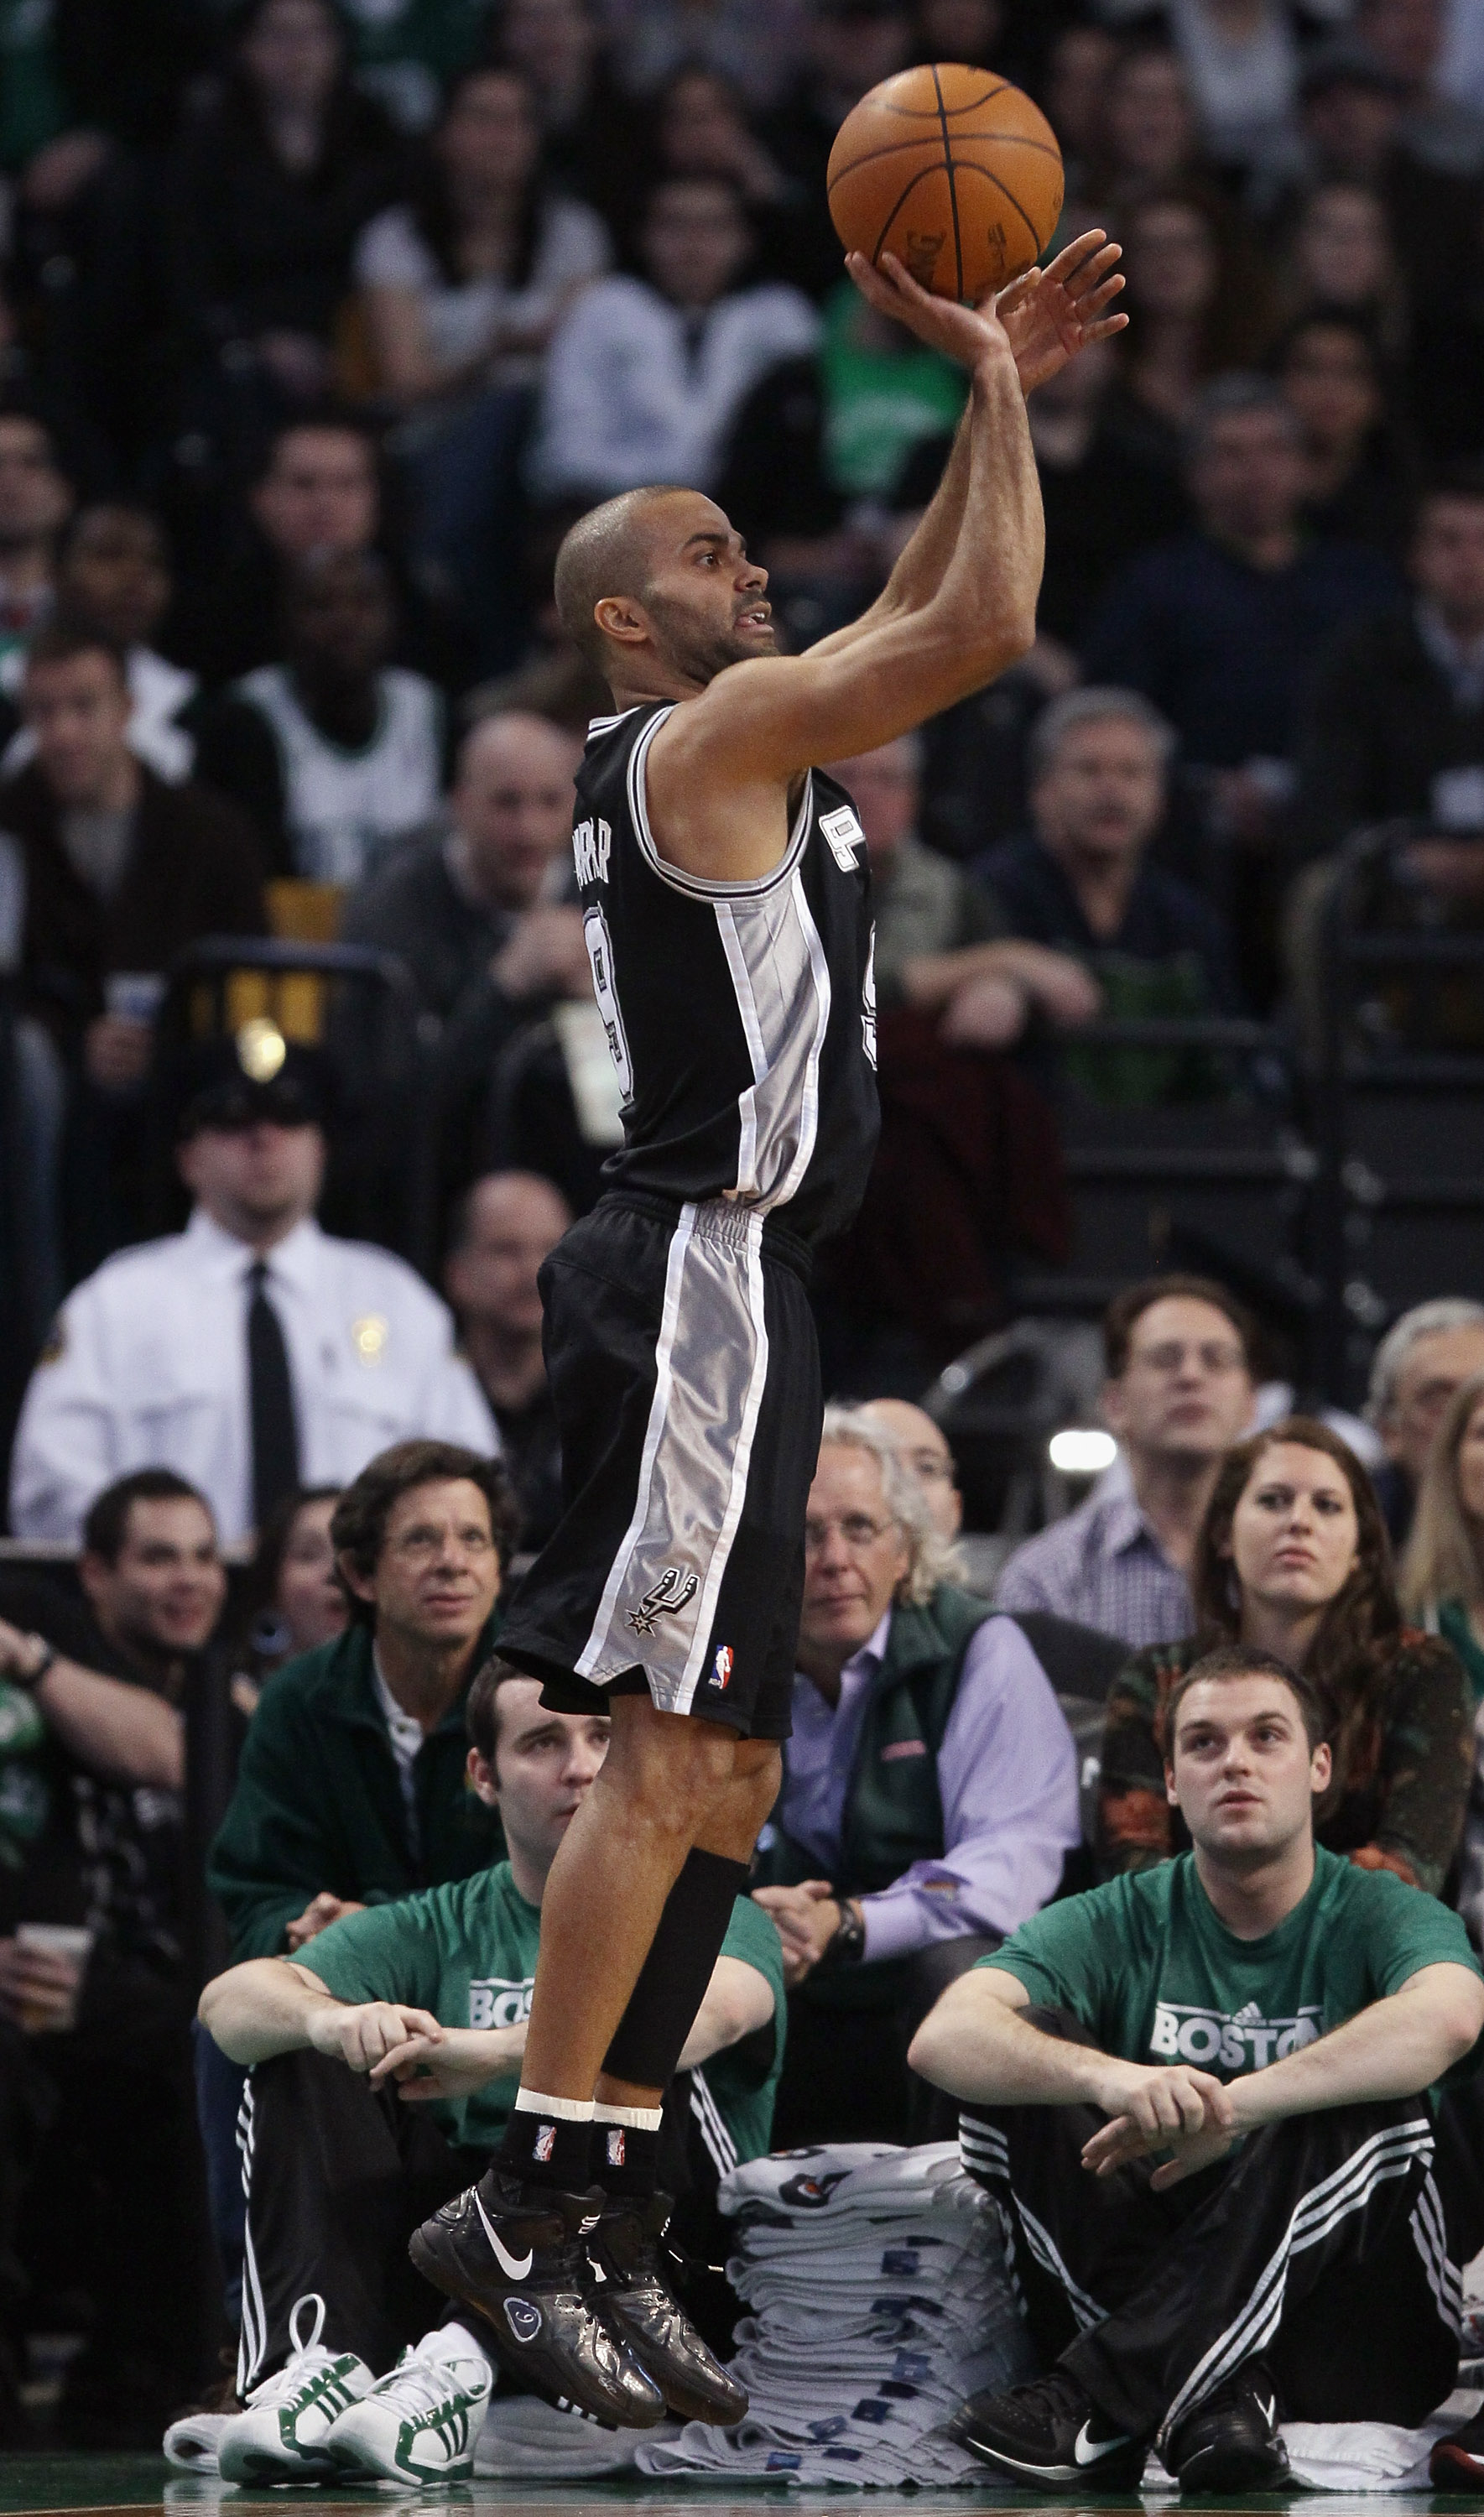 BOSTON, MA - JANUARY 05:  Tony Parker #9 of the San Antonio Spurs takes a shot in the first half against the Boston Celtics on January 5, 2011 at the TD Garden in Boston, Massachusetts. NOTE TO USER: User expressly acknowledges and agrees that, by downloa